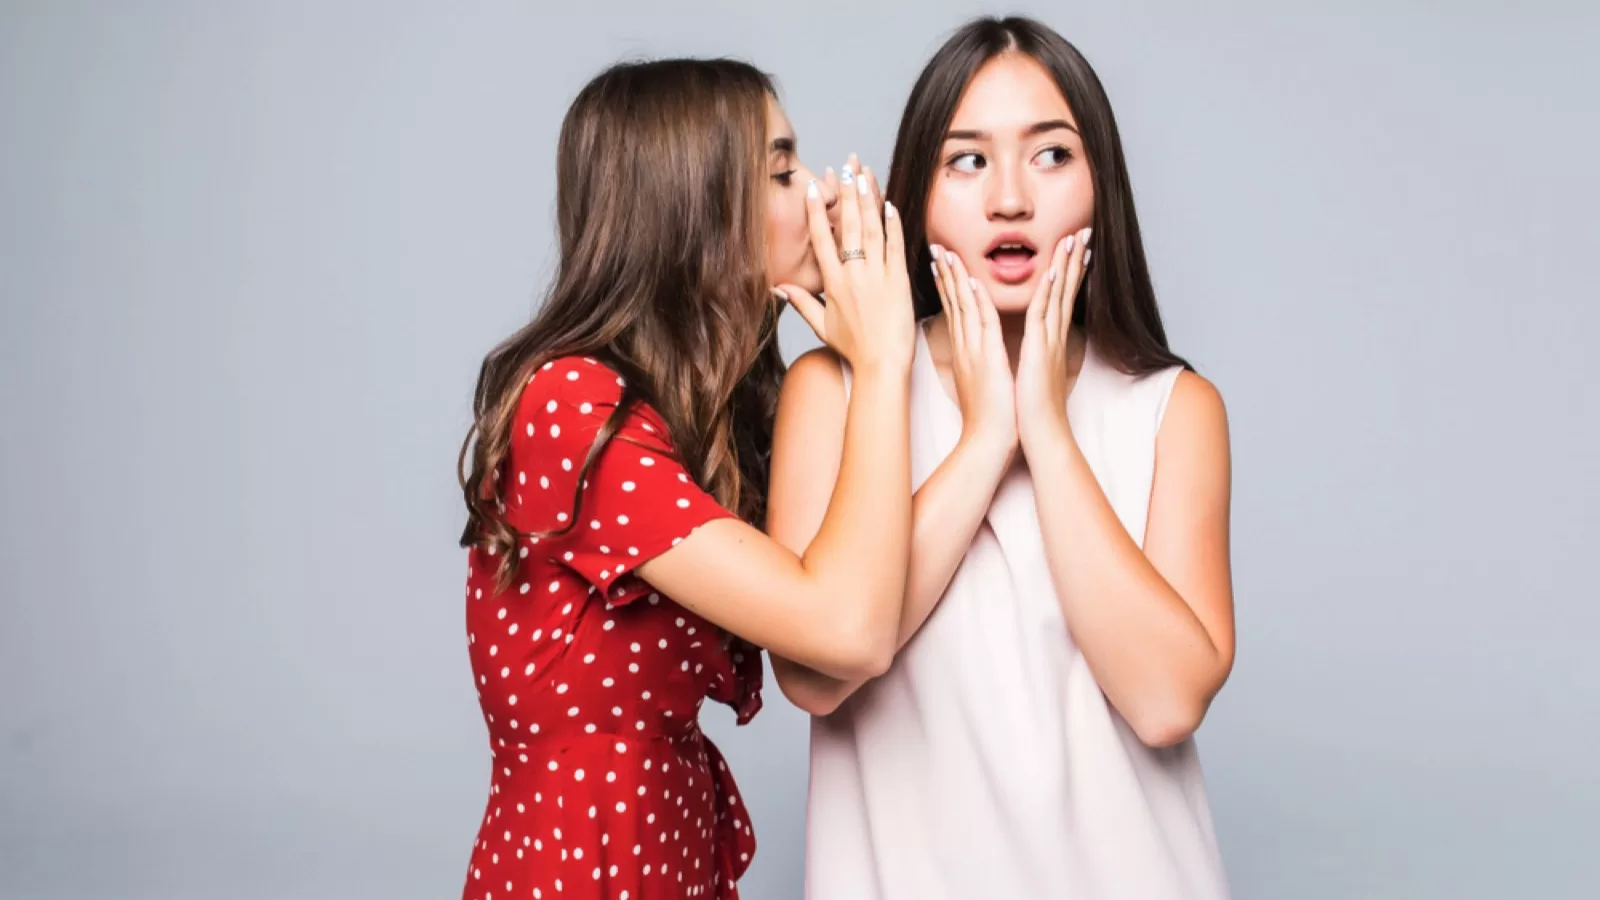 Woman telling secret to another woman